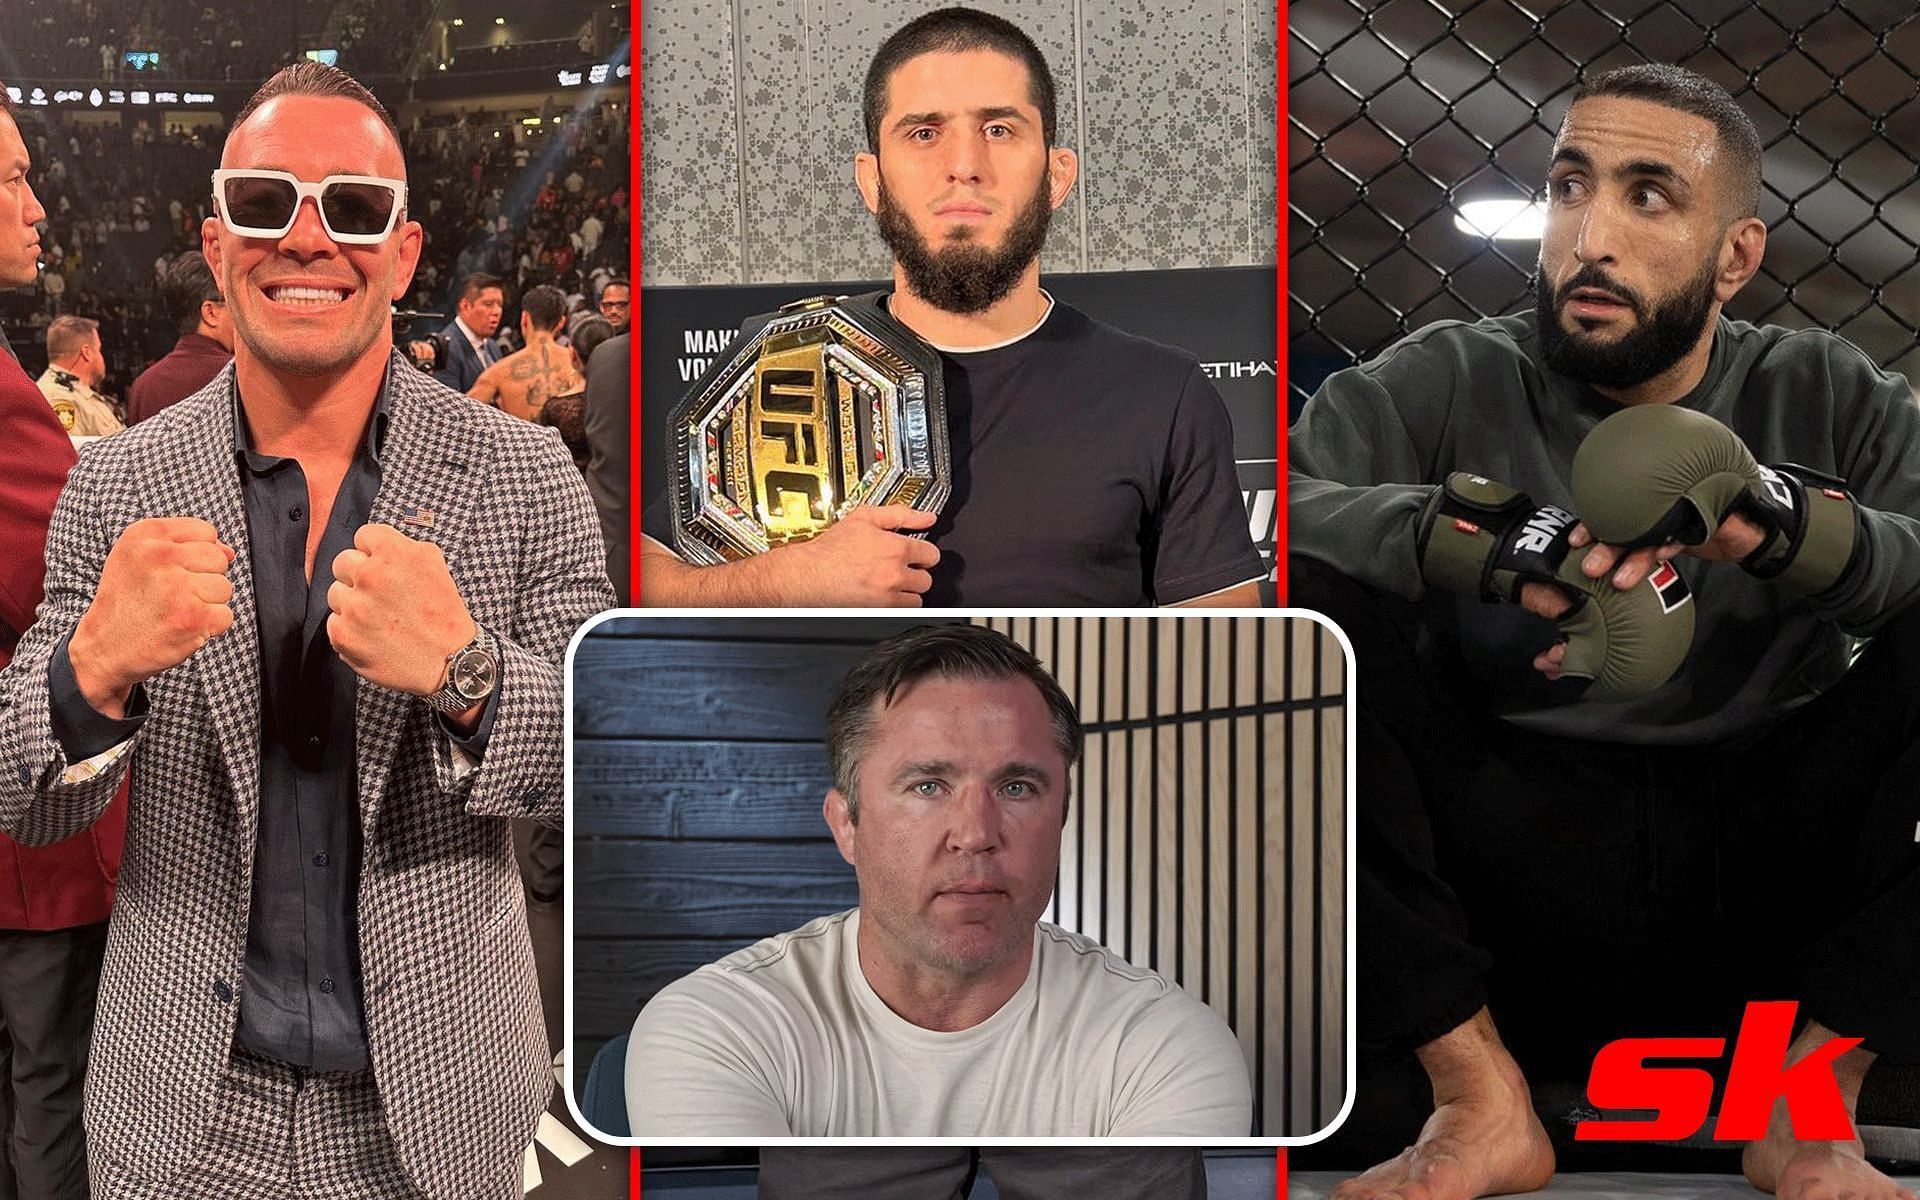 Colby Covington, Islam Makhachev, Chael Sonnen and Belal Muhammad [Image credits: @chaelsonnen on YT, @colbycovmma, @bullyb170, @islam_makhachev on Instagram] 